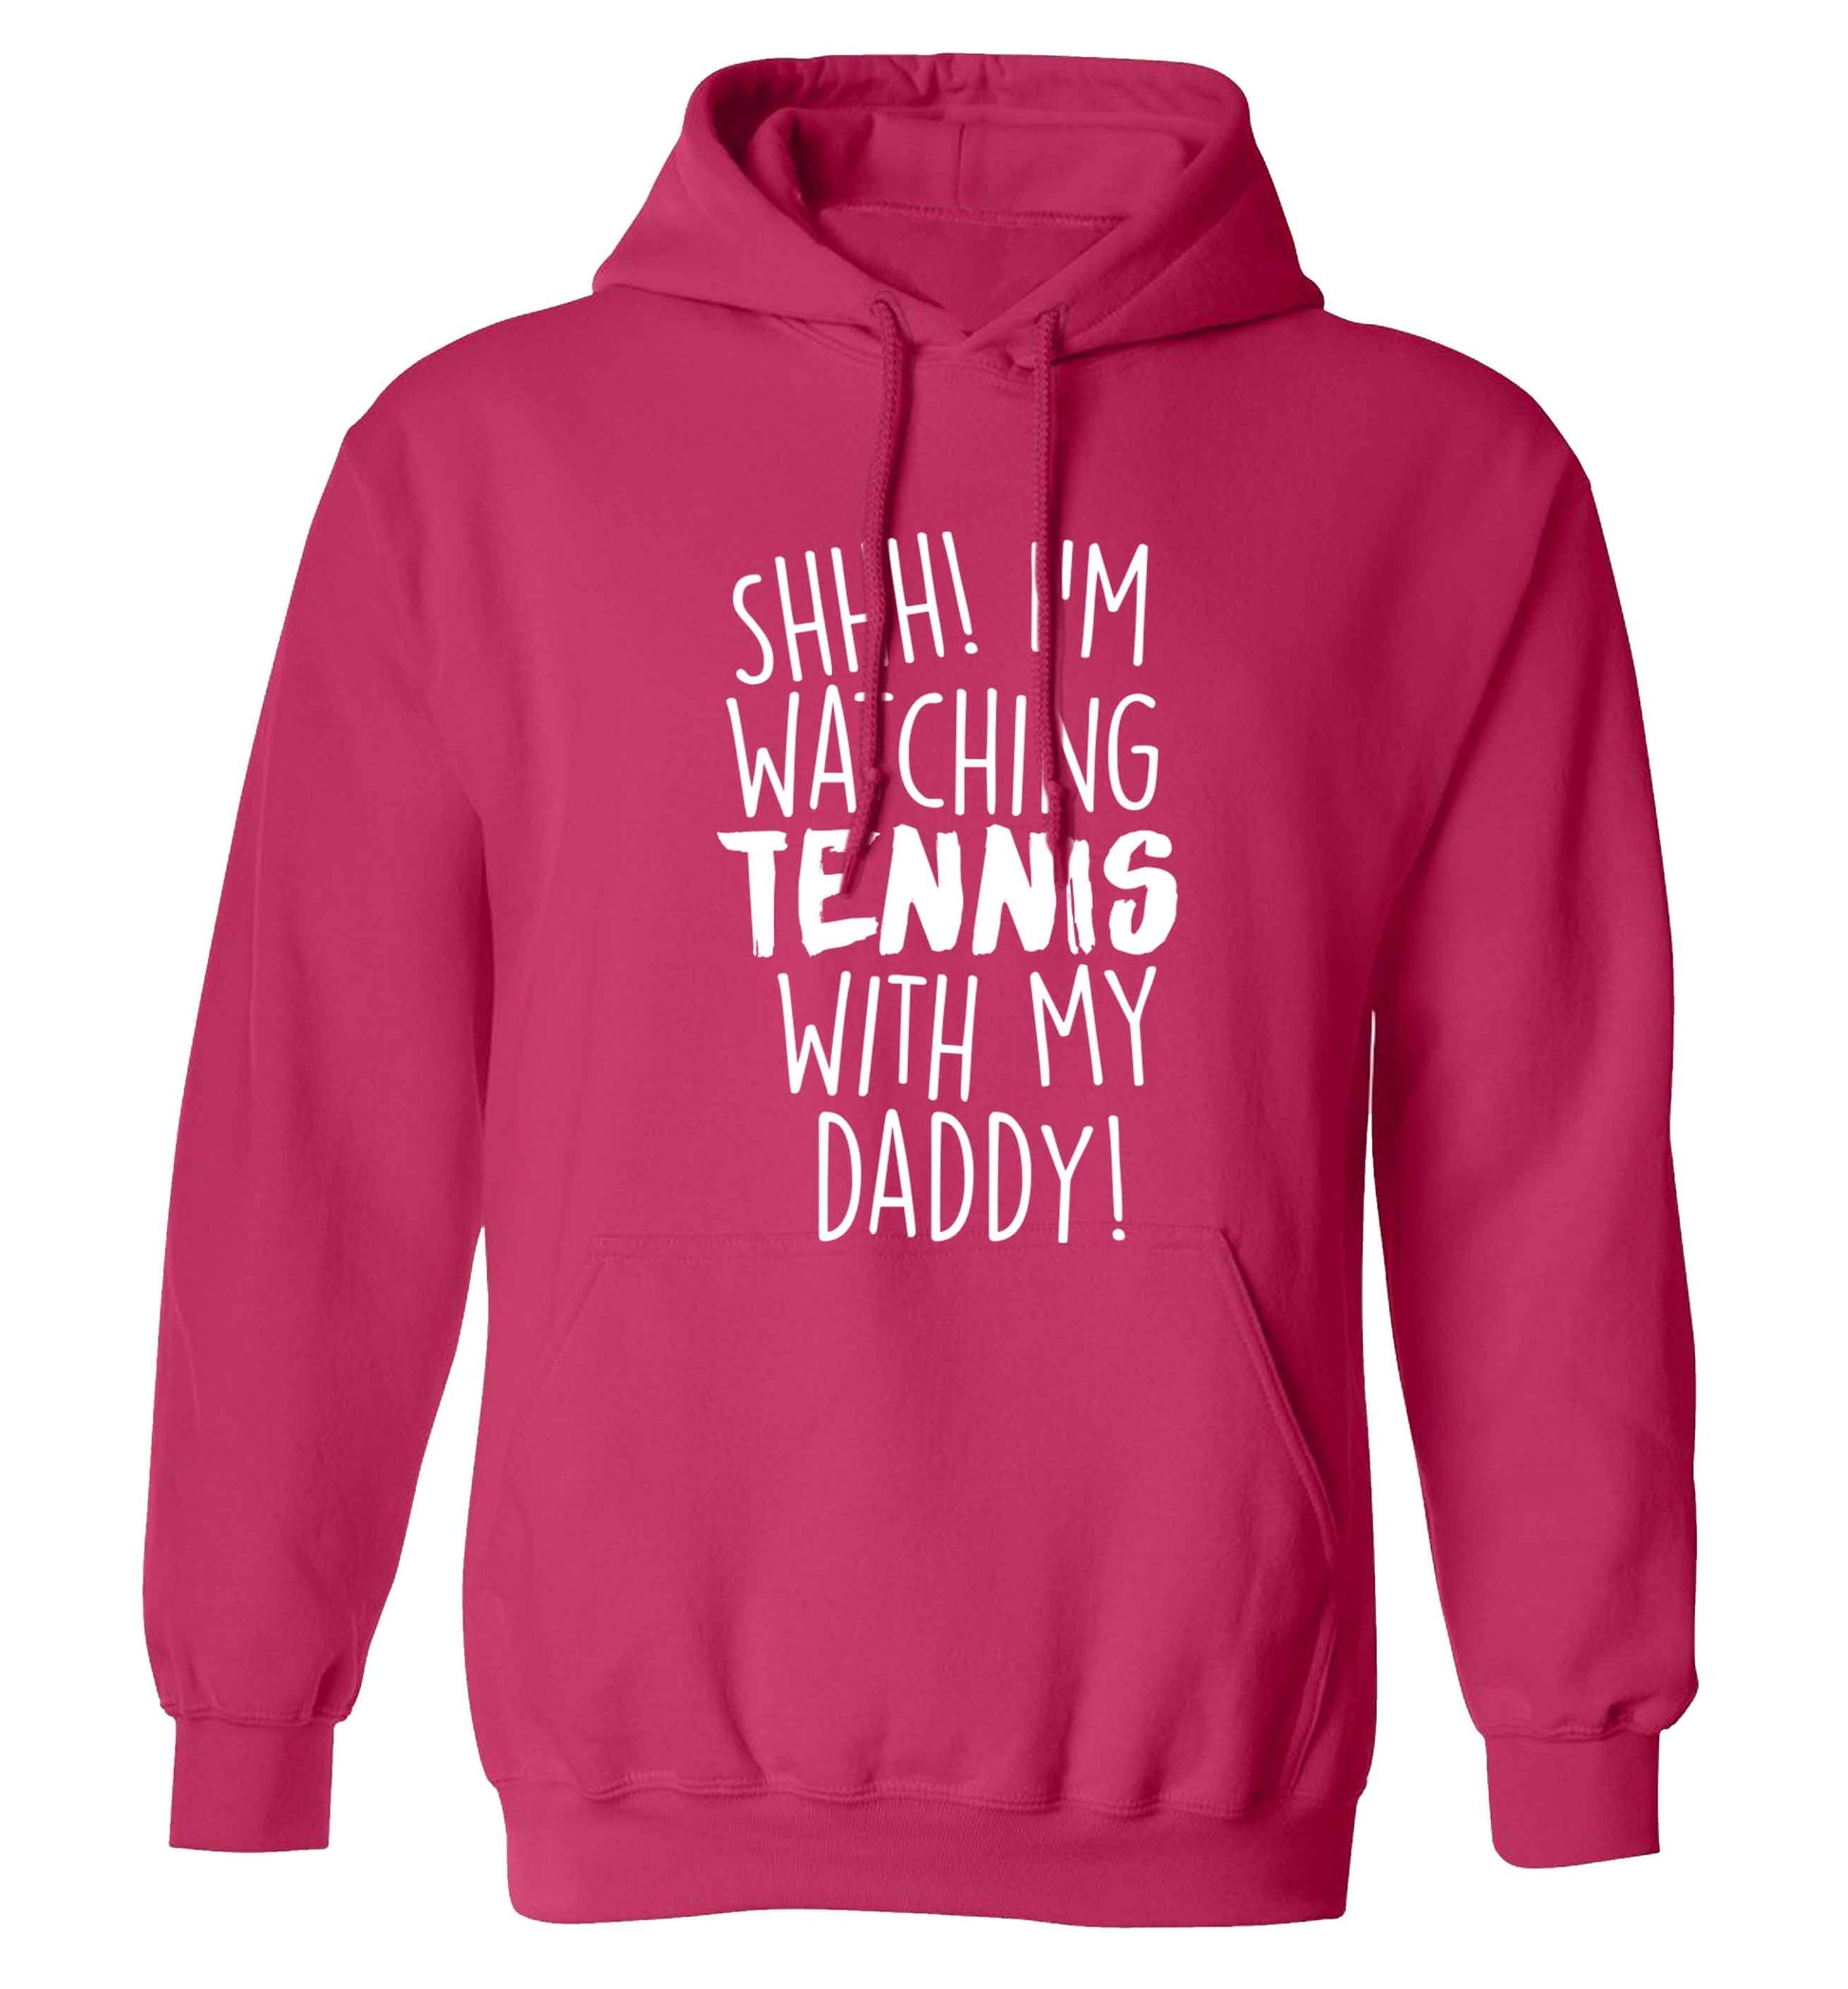 Shh! I'm watching tennis with my daddy! adults unisex pink hoodie 2XL